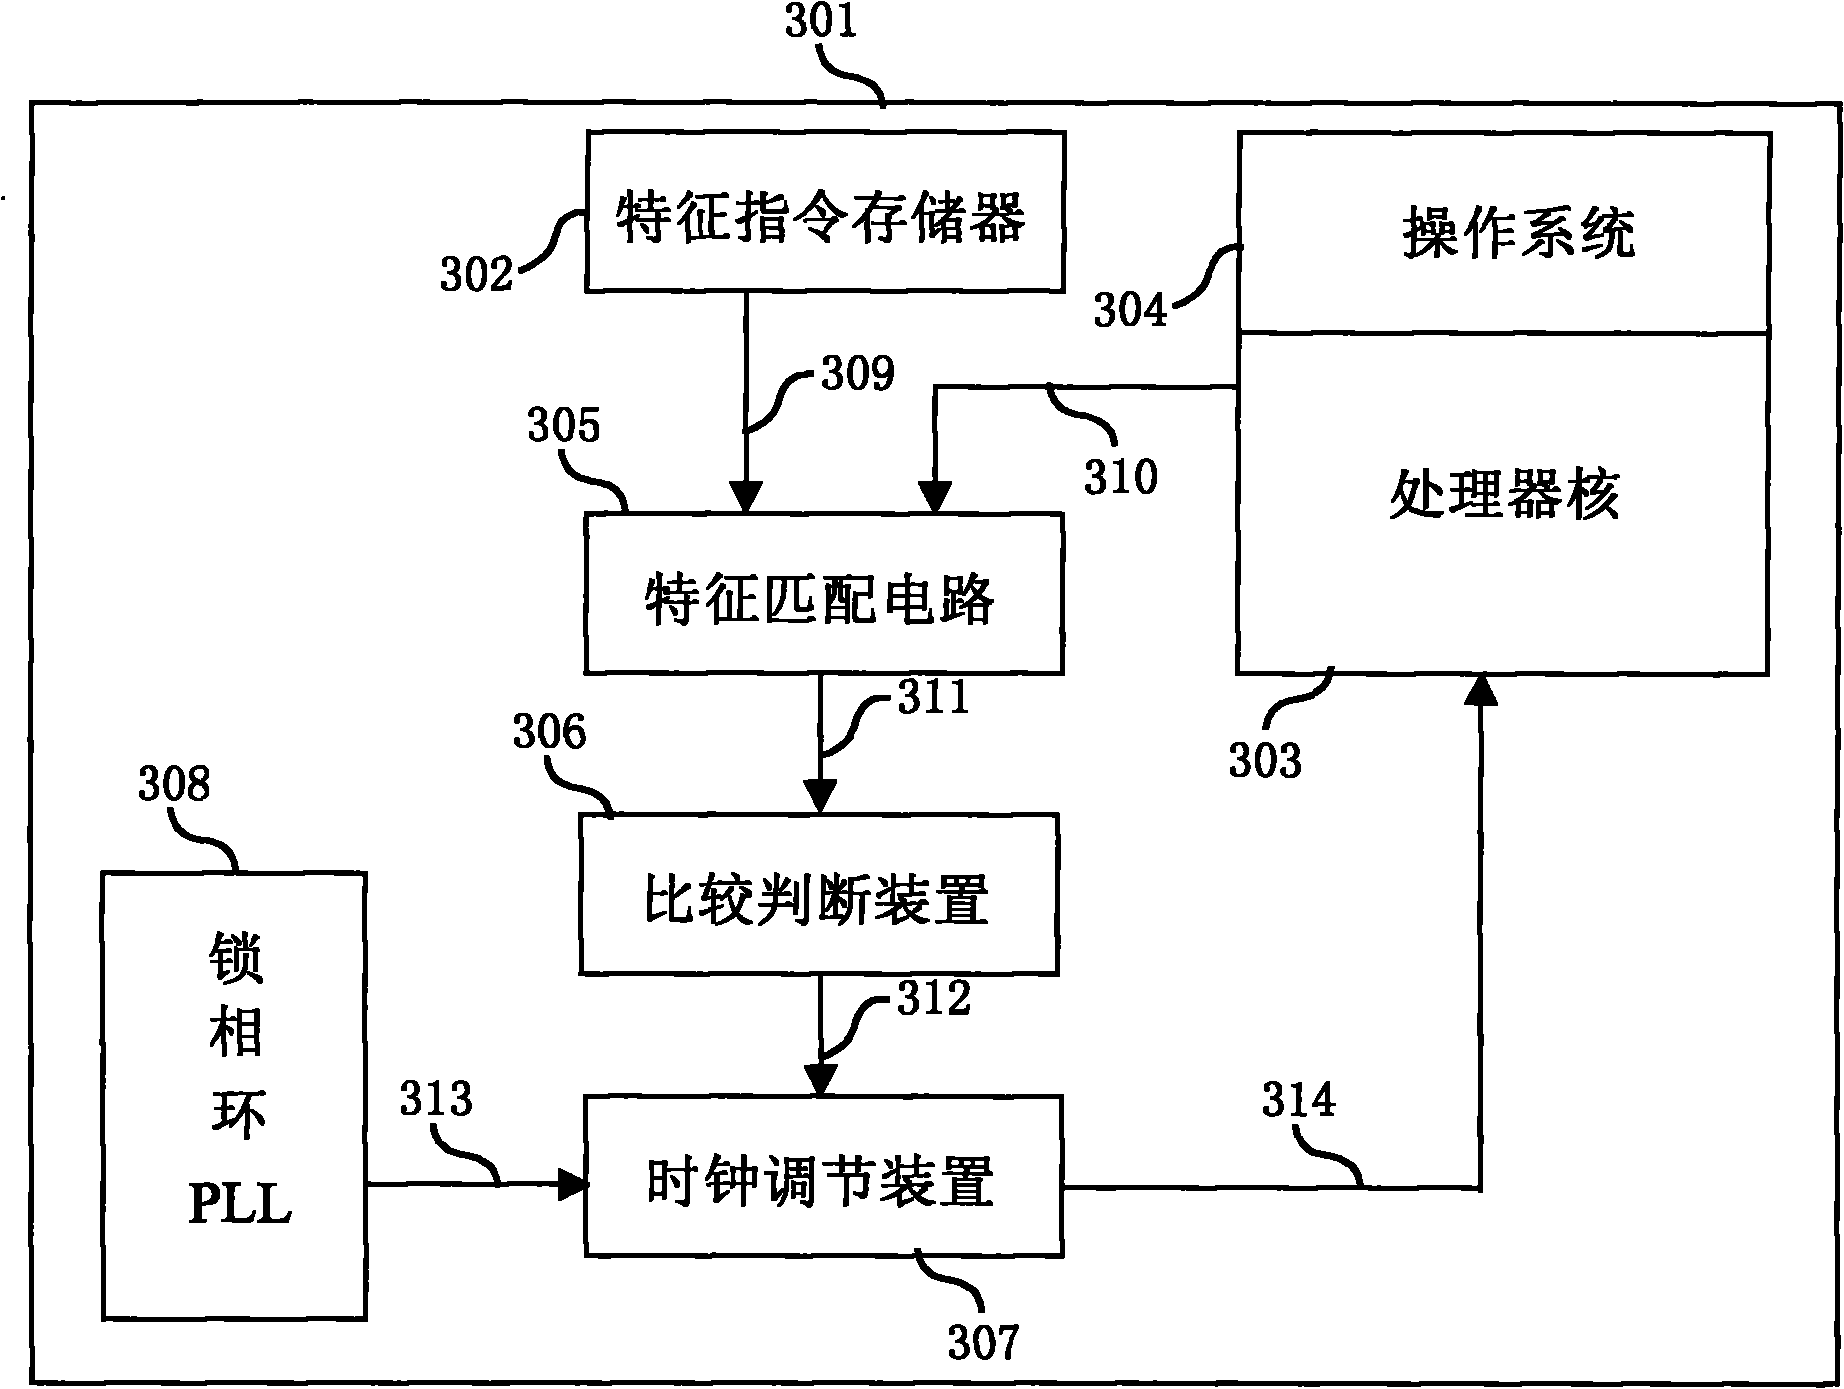 Method and device for automatically adjusting clock frequency of system in real time